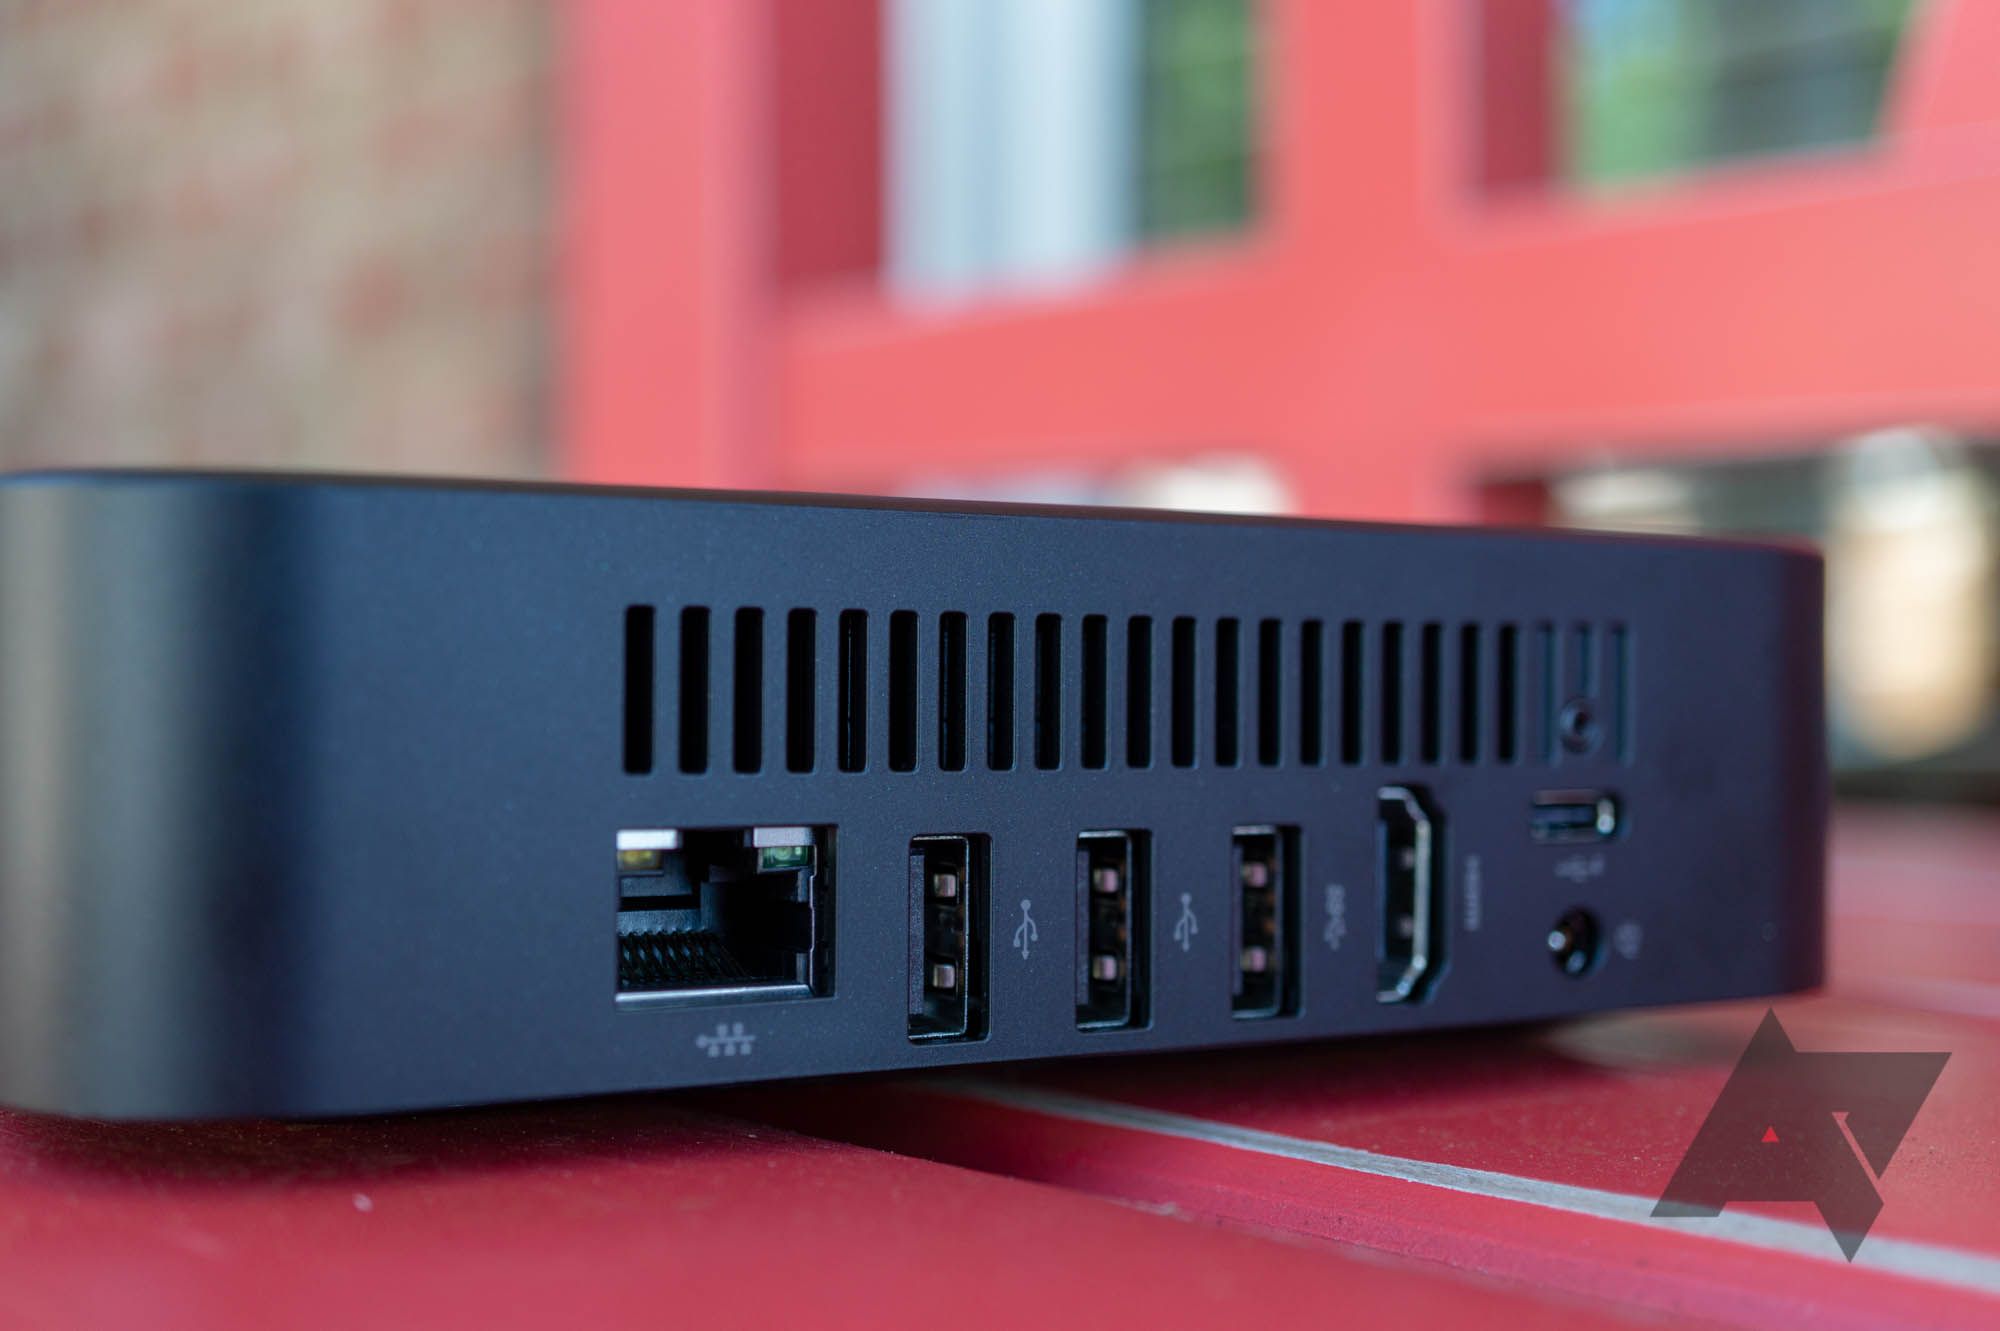 CTL Chromebox CBx1 review: A good Chrome OS desktop at a great price